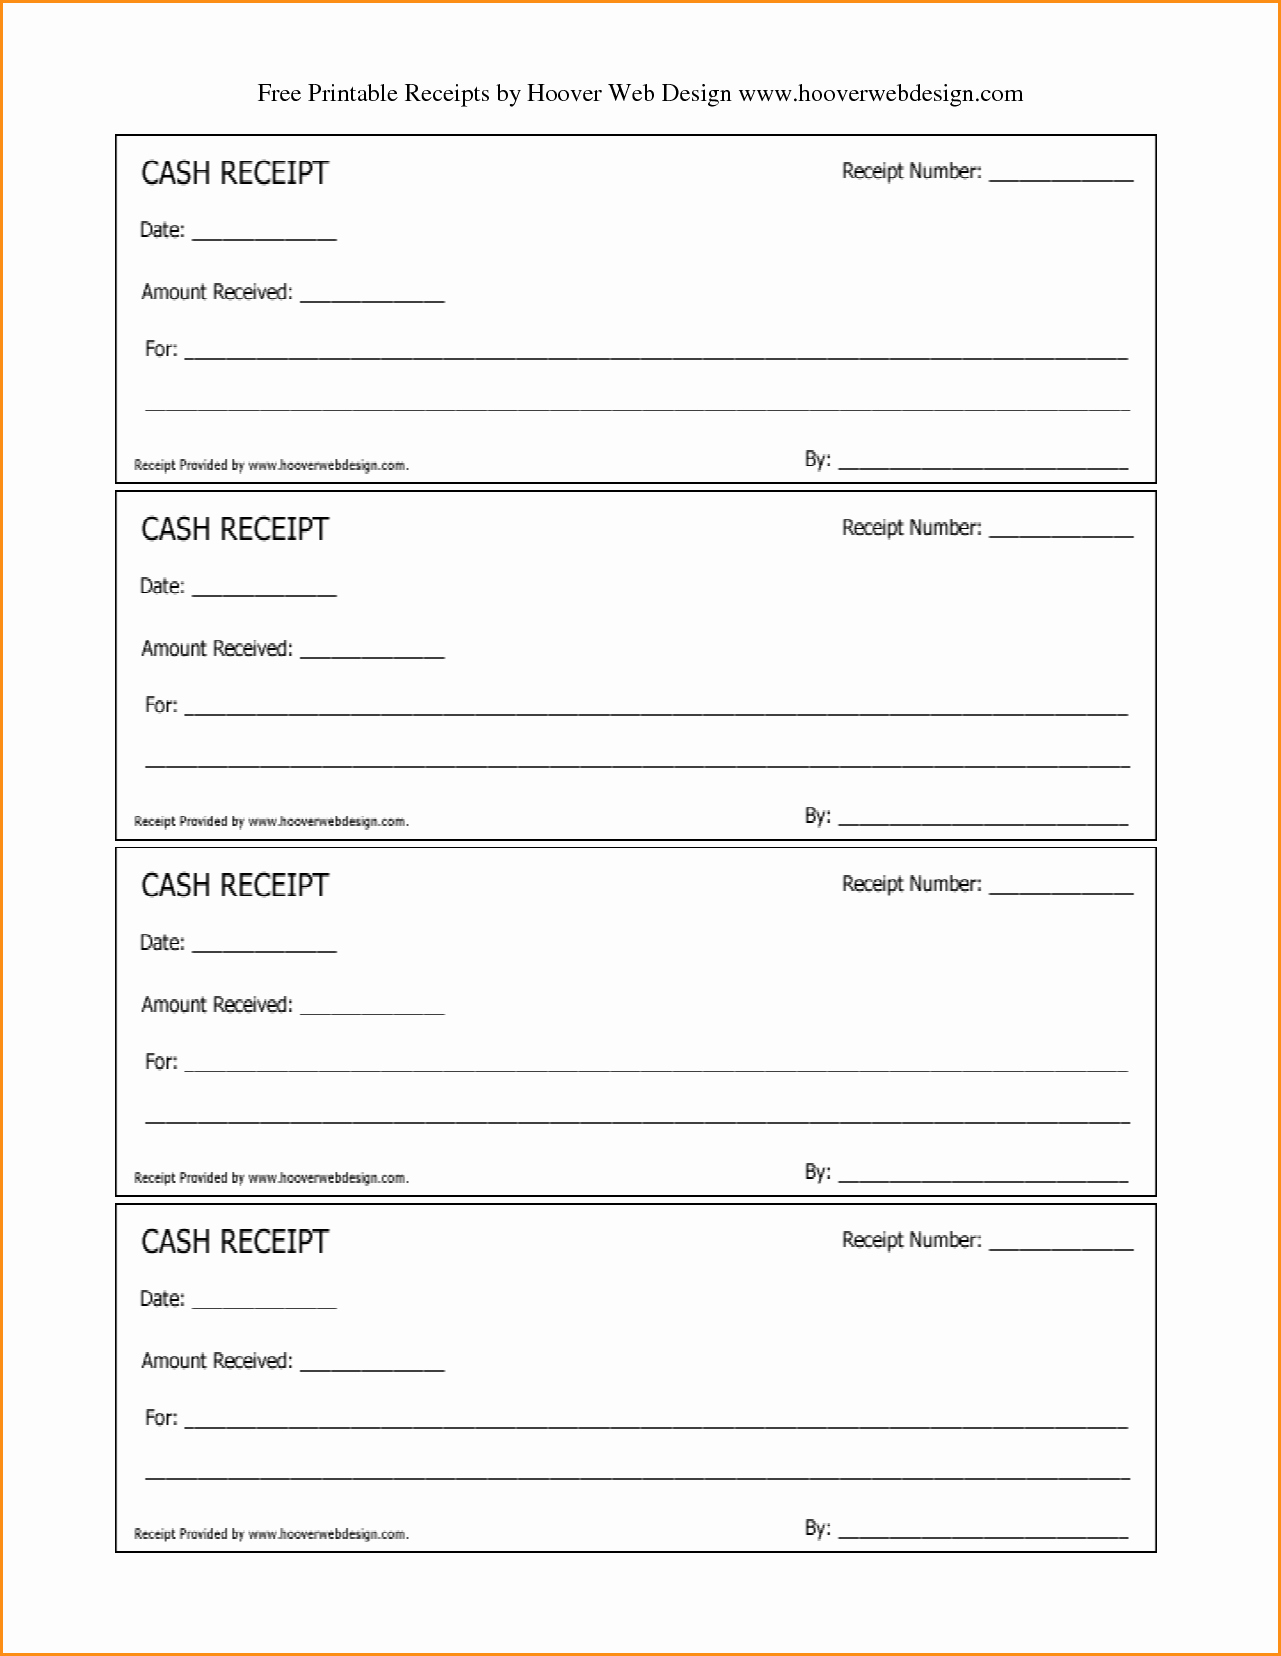 Invoice and Receipt Template Beautiful 11 Free Receipt Template